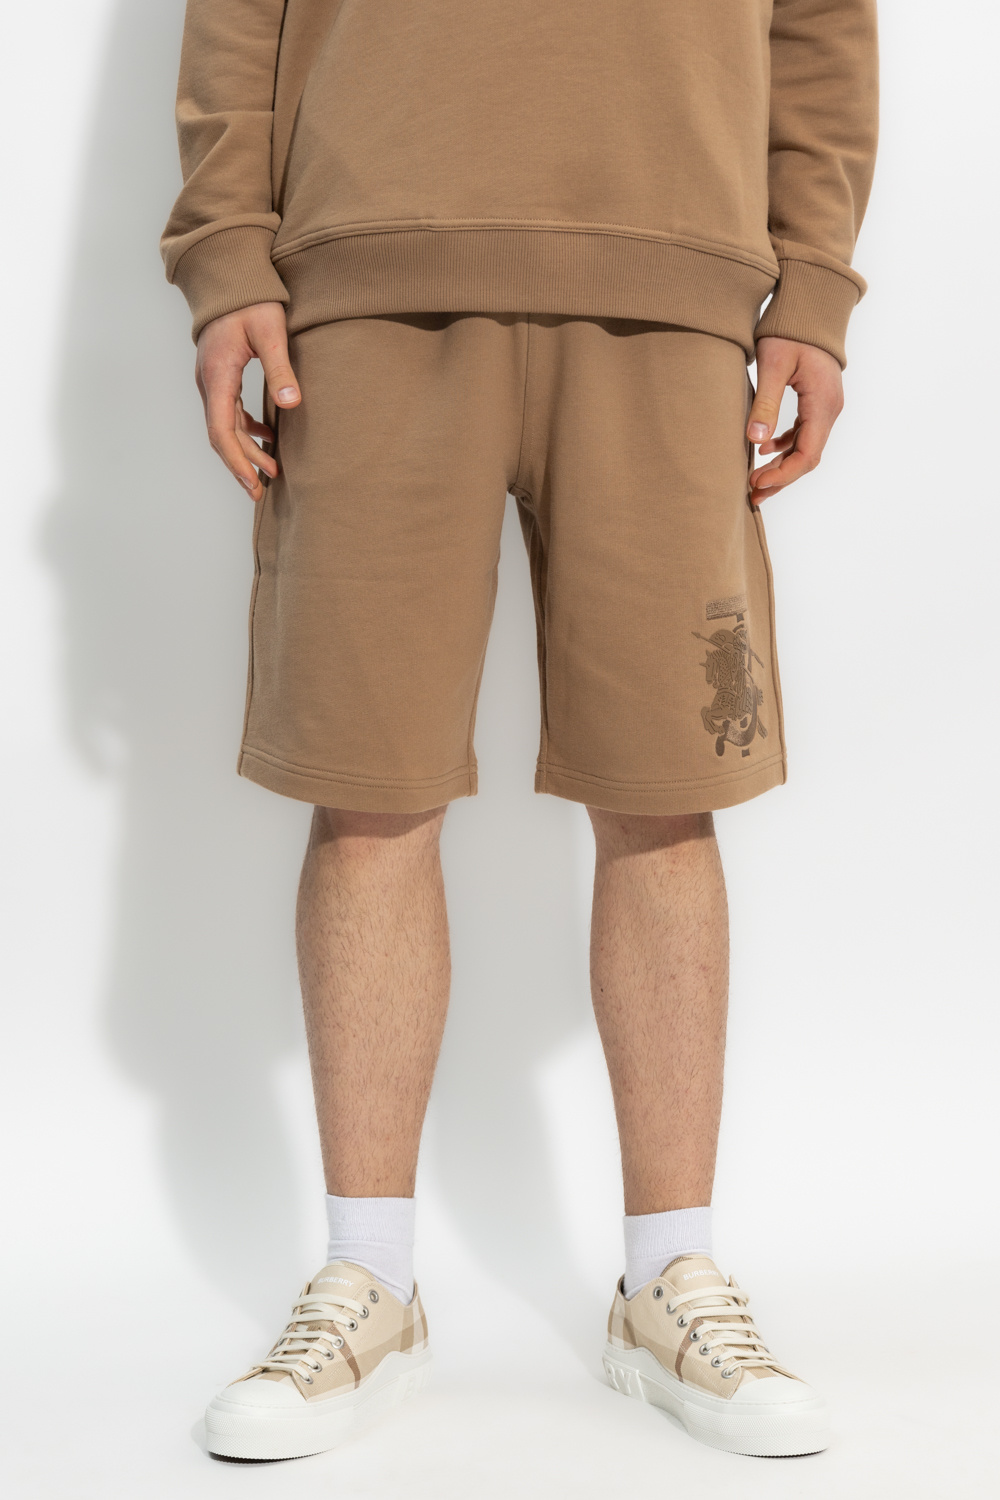 Burberry ‘Tyler’ shorts with logo